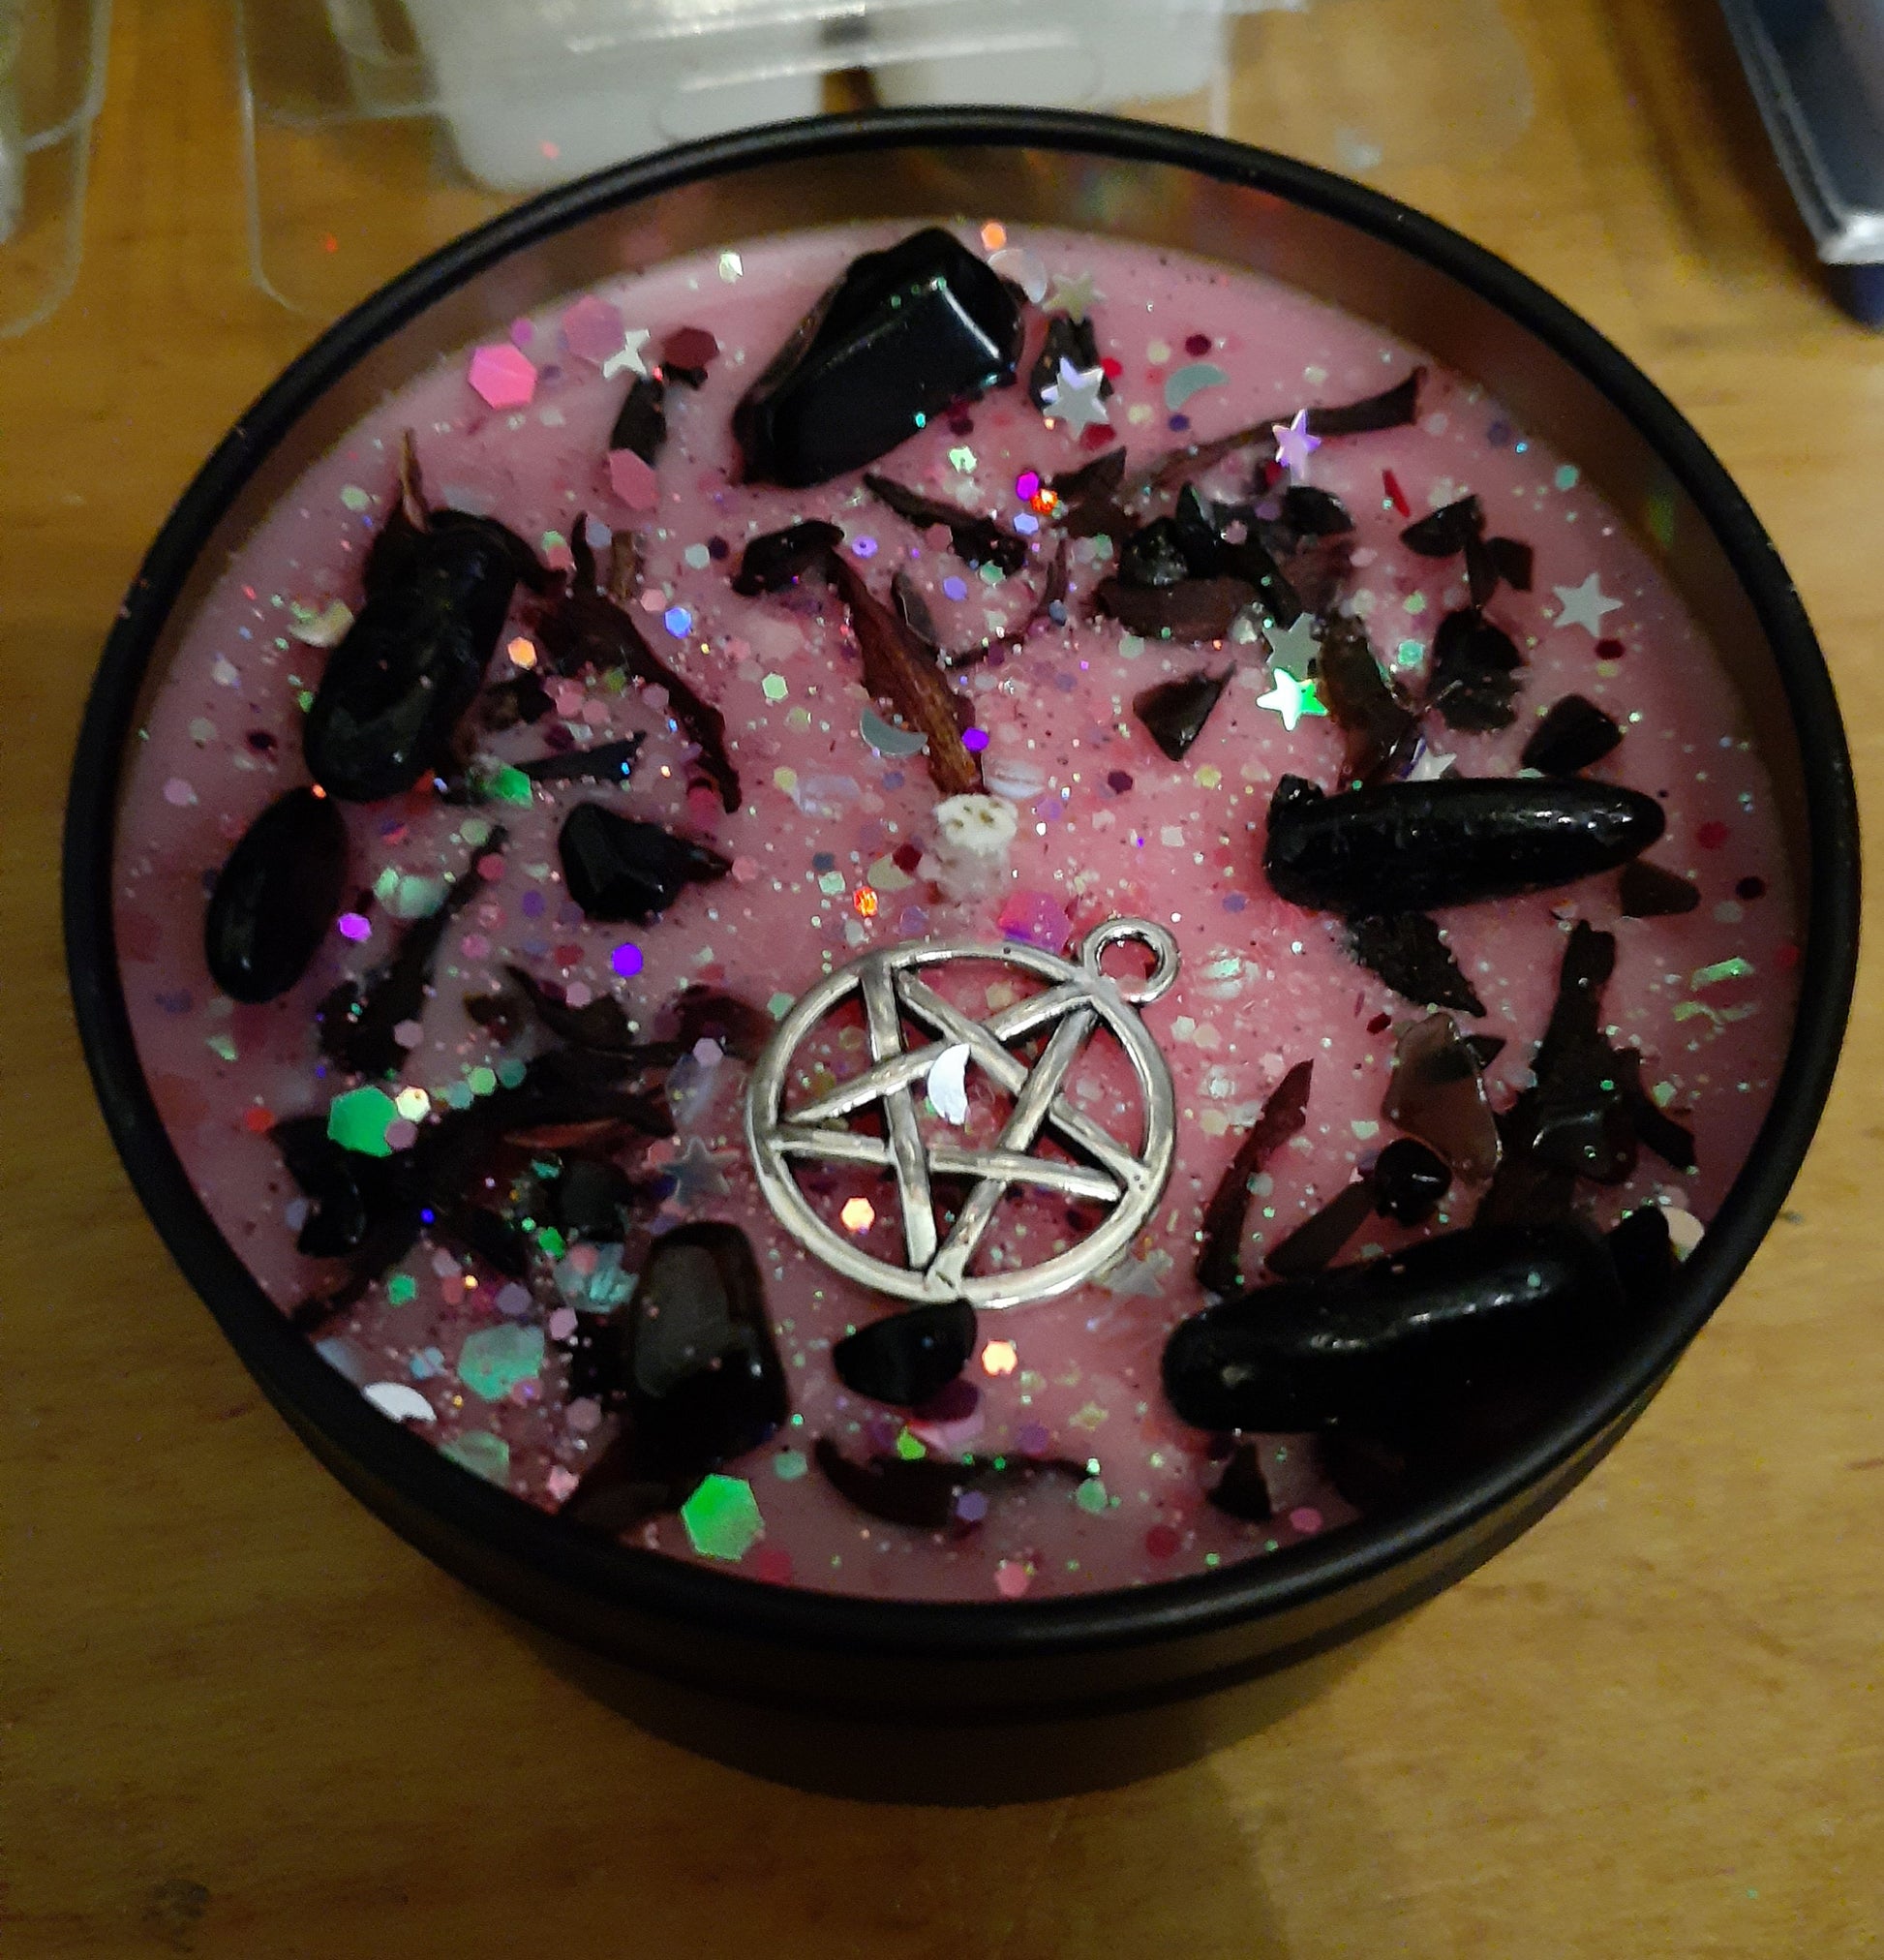 KALI 8oz Hindu Goddess of Death, Destruction, Time, Chaos, and Sexuality - Amber & Lavender w/Hibiscus and Obsidian - Pagan, Wicca, Wiccan